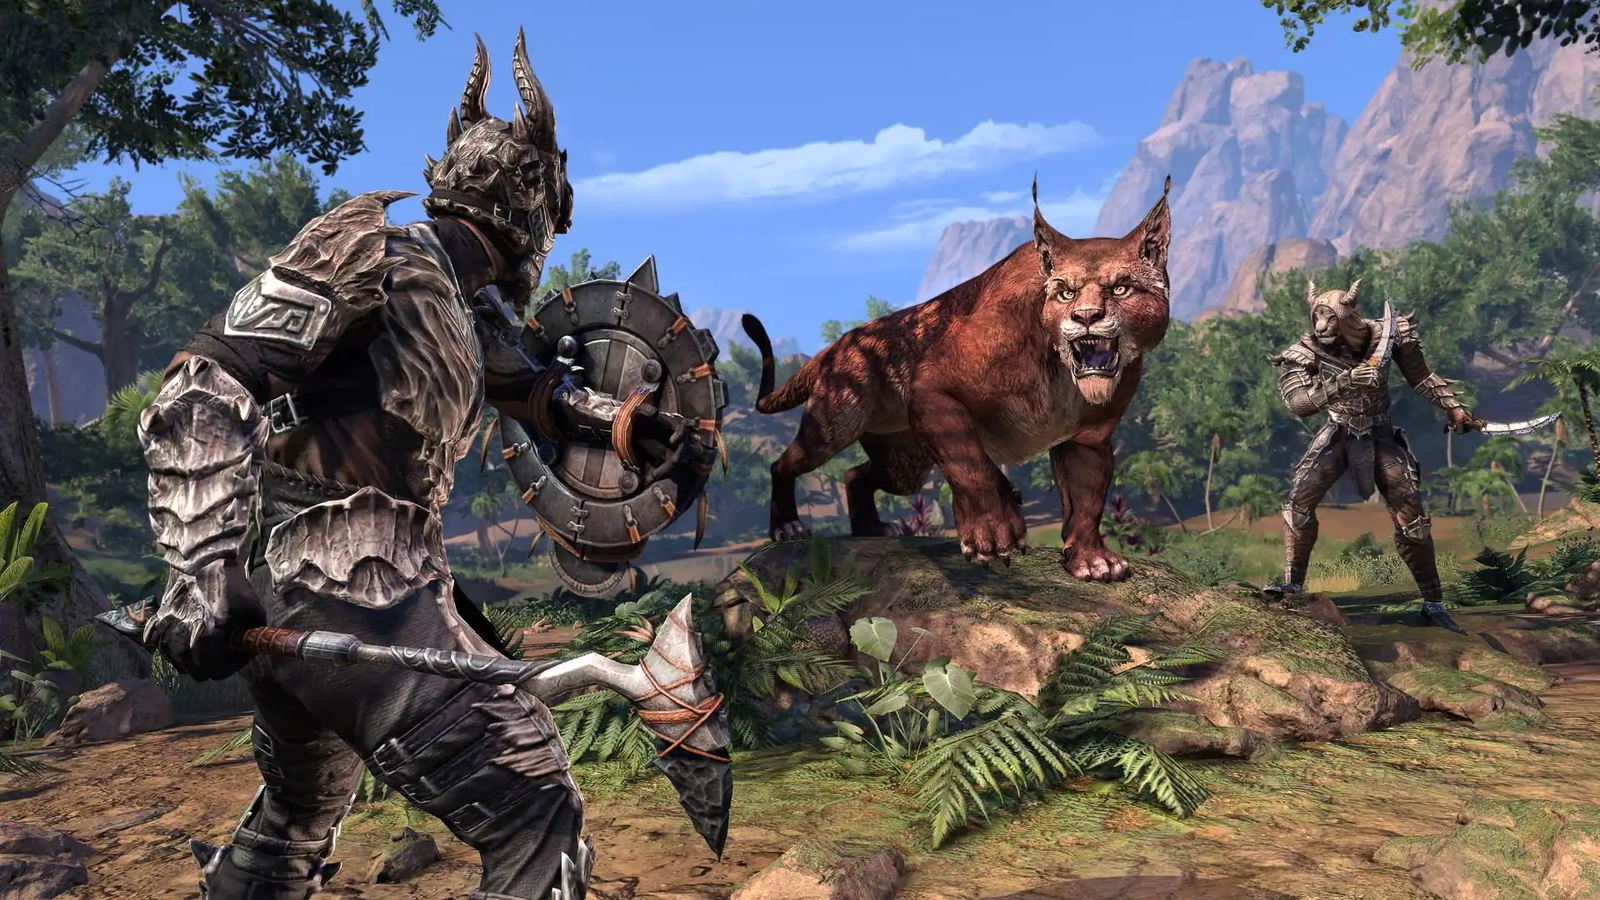 The Elder Scrolls 6 Release Date: Bethesda suggests TES6 could be